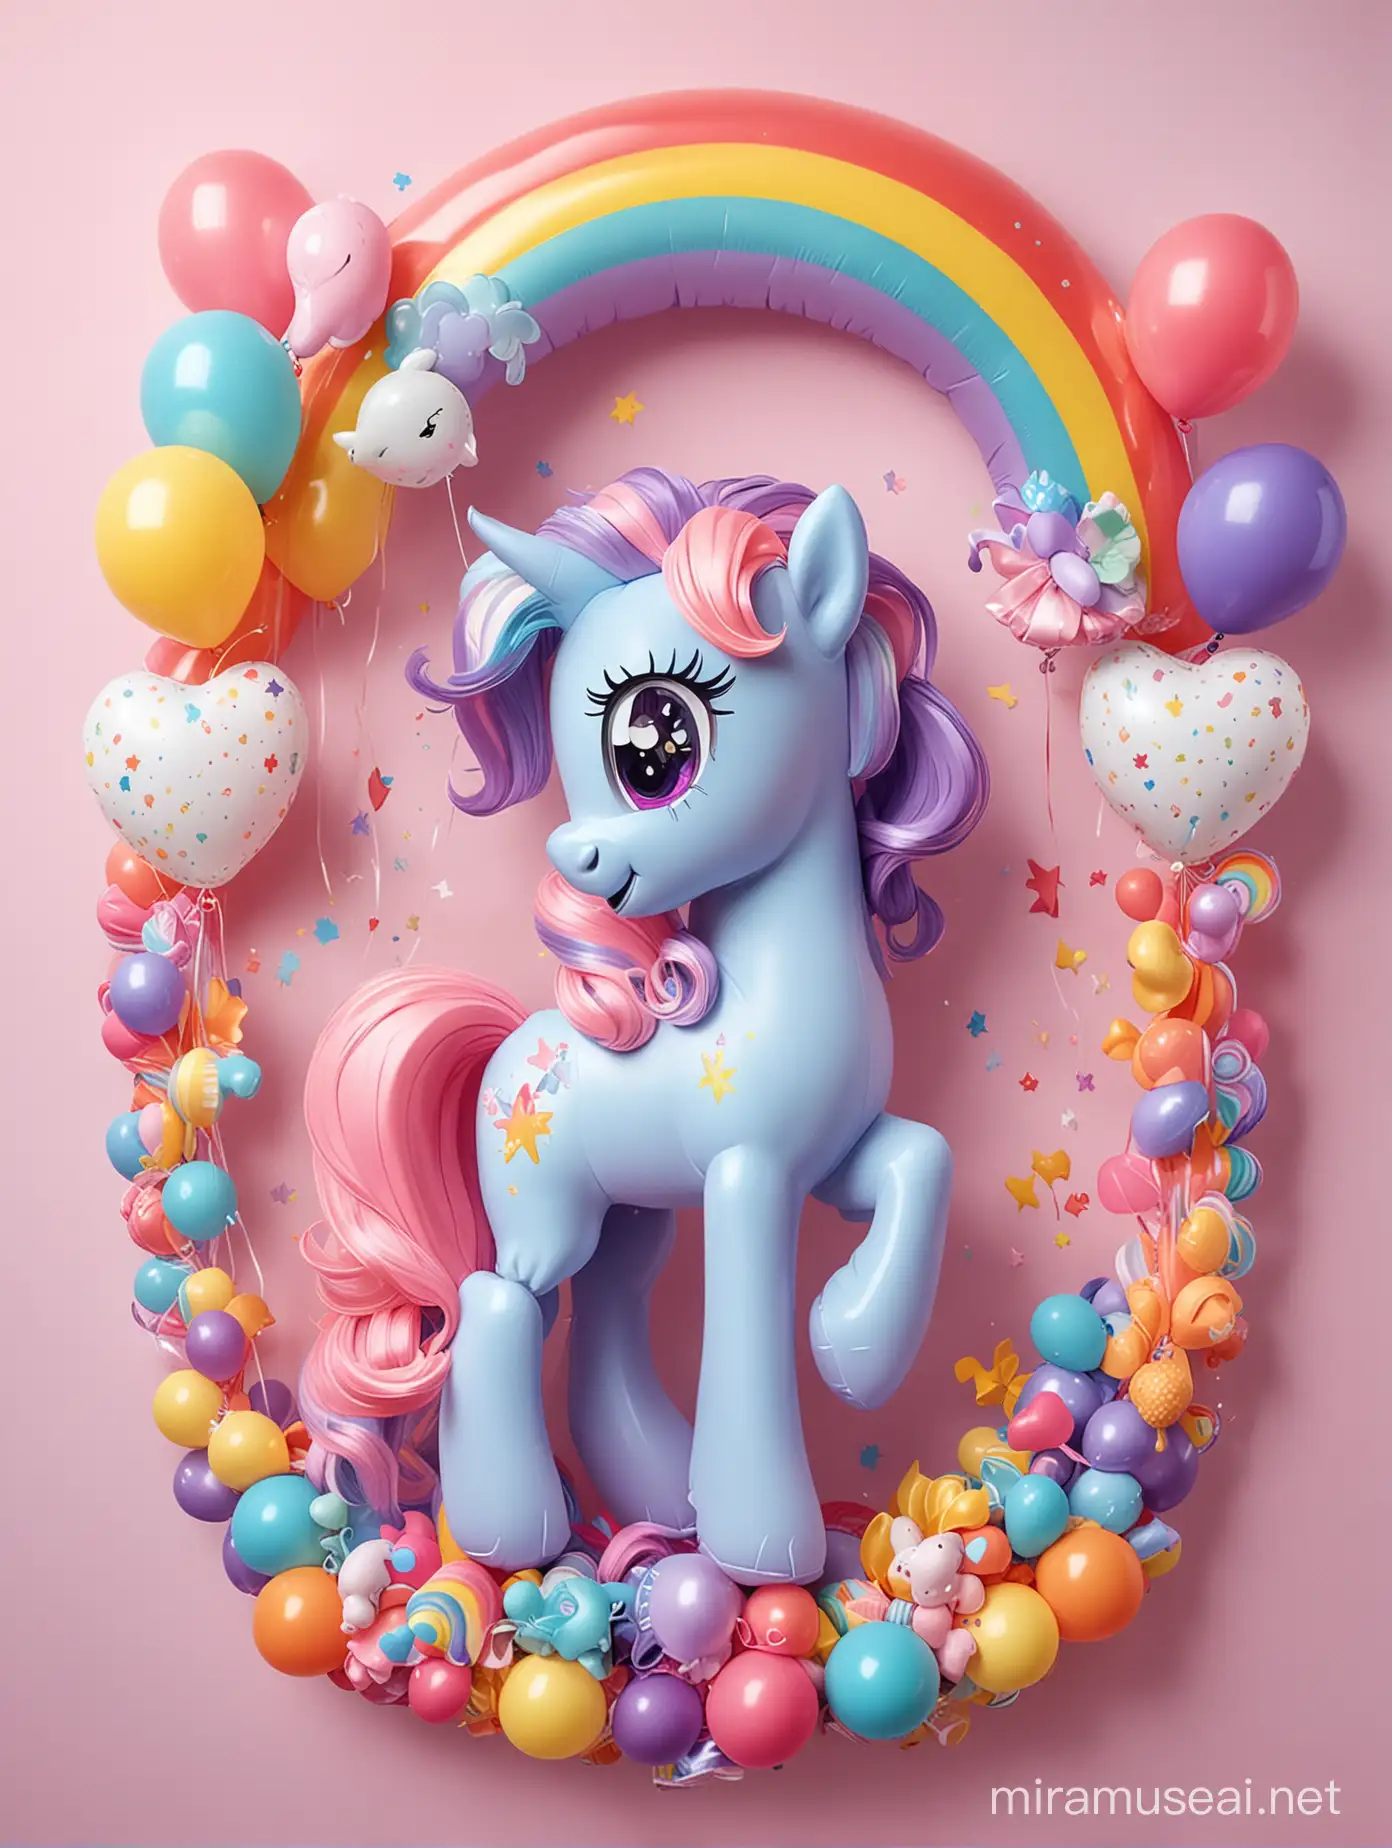 My little pony surrounded with bright pastel colors,  rainbows and balloons